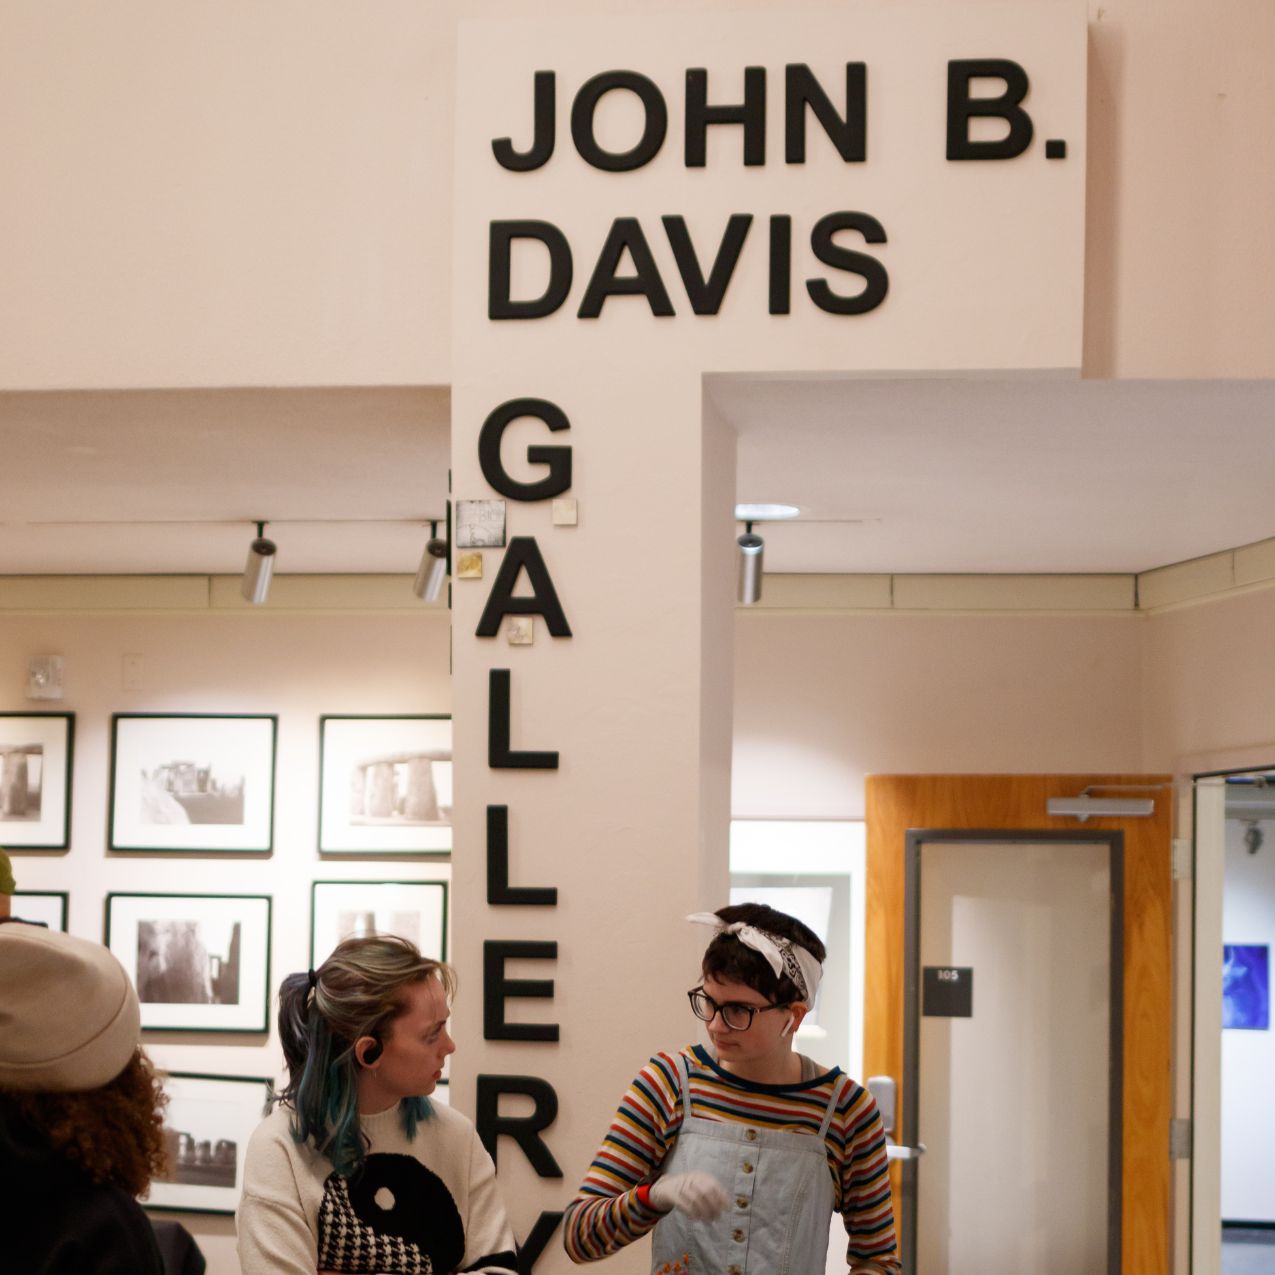 People mingle outside the entry to the John B. Davis art gallery in the Fine Arts building